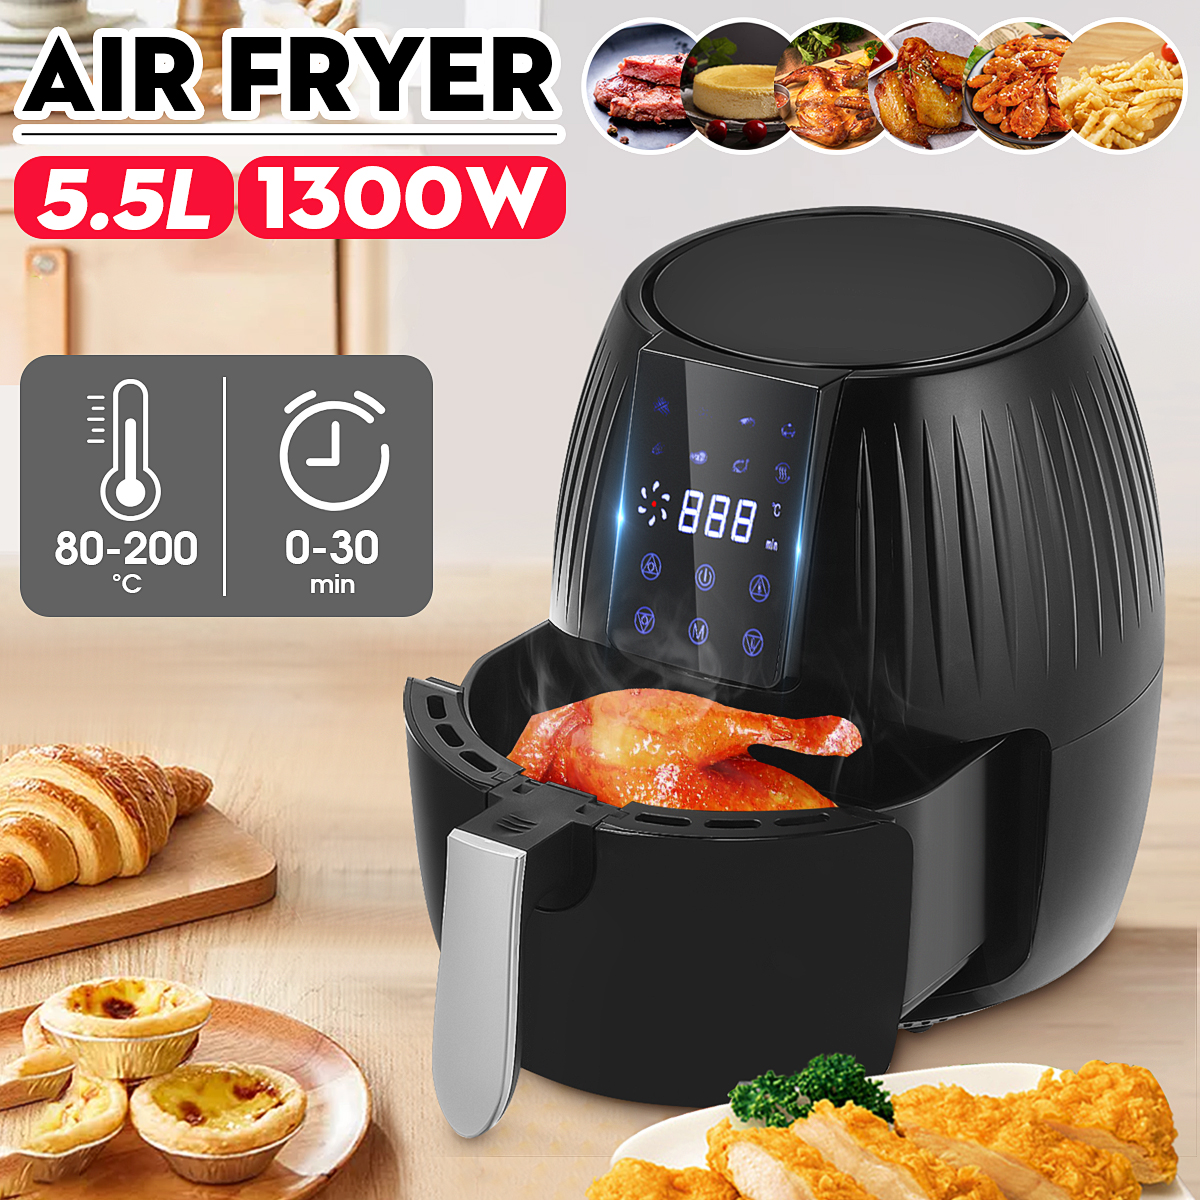 1300W-Electric-Hot-Air-Fryers-Oven-Oilless-Cooker-55L-Large-Capacity-Touch-Screen-360deg-Cycle-Heati-1847660-1